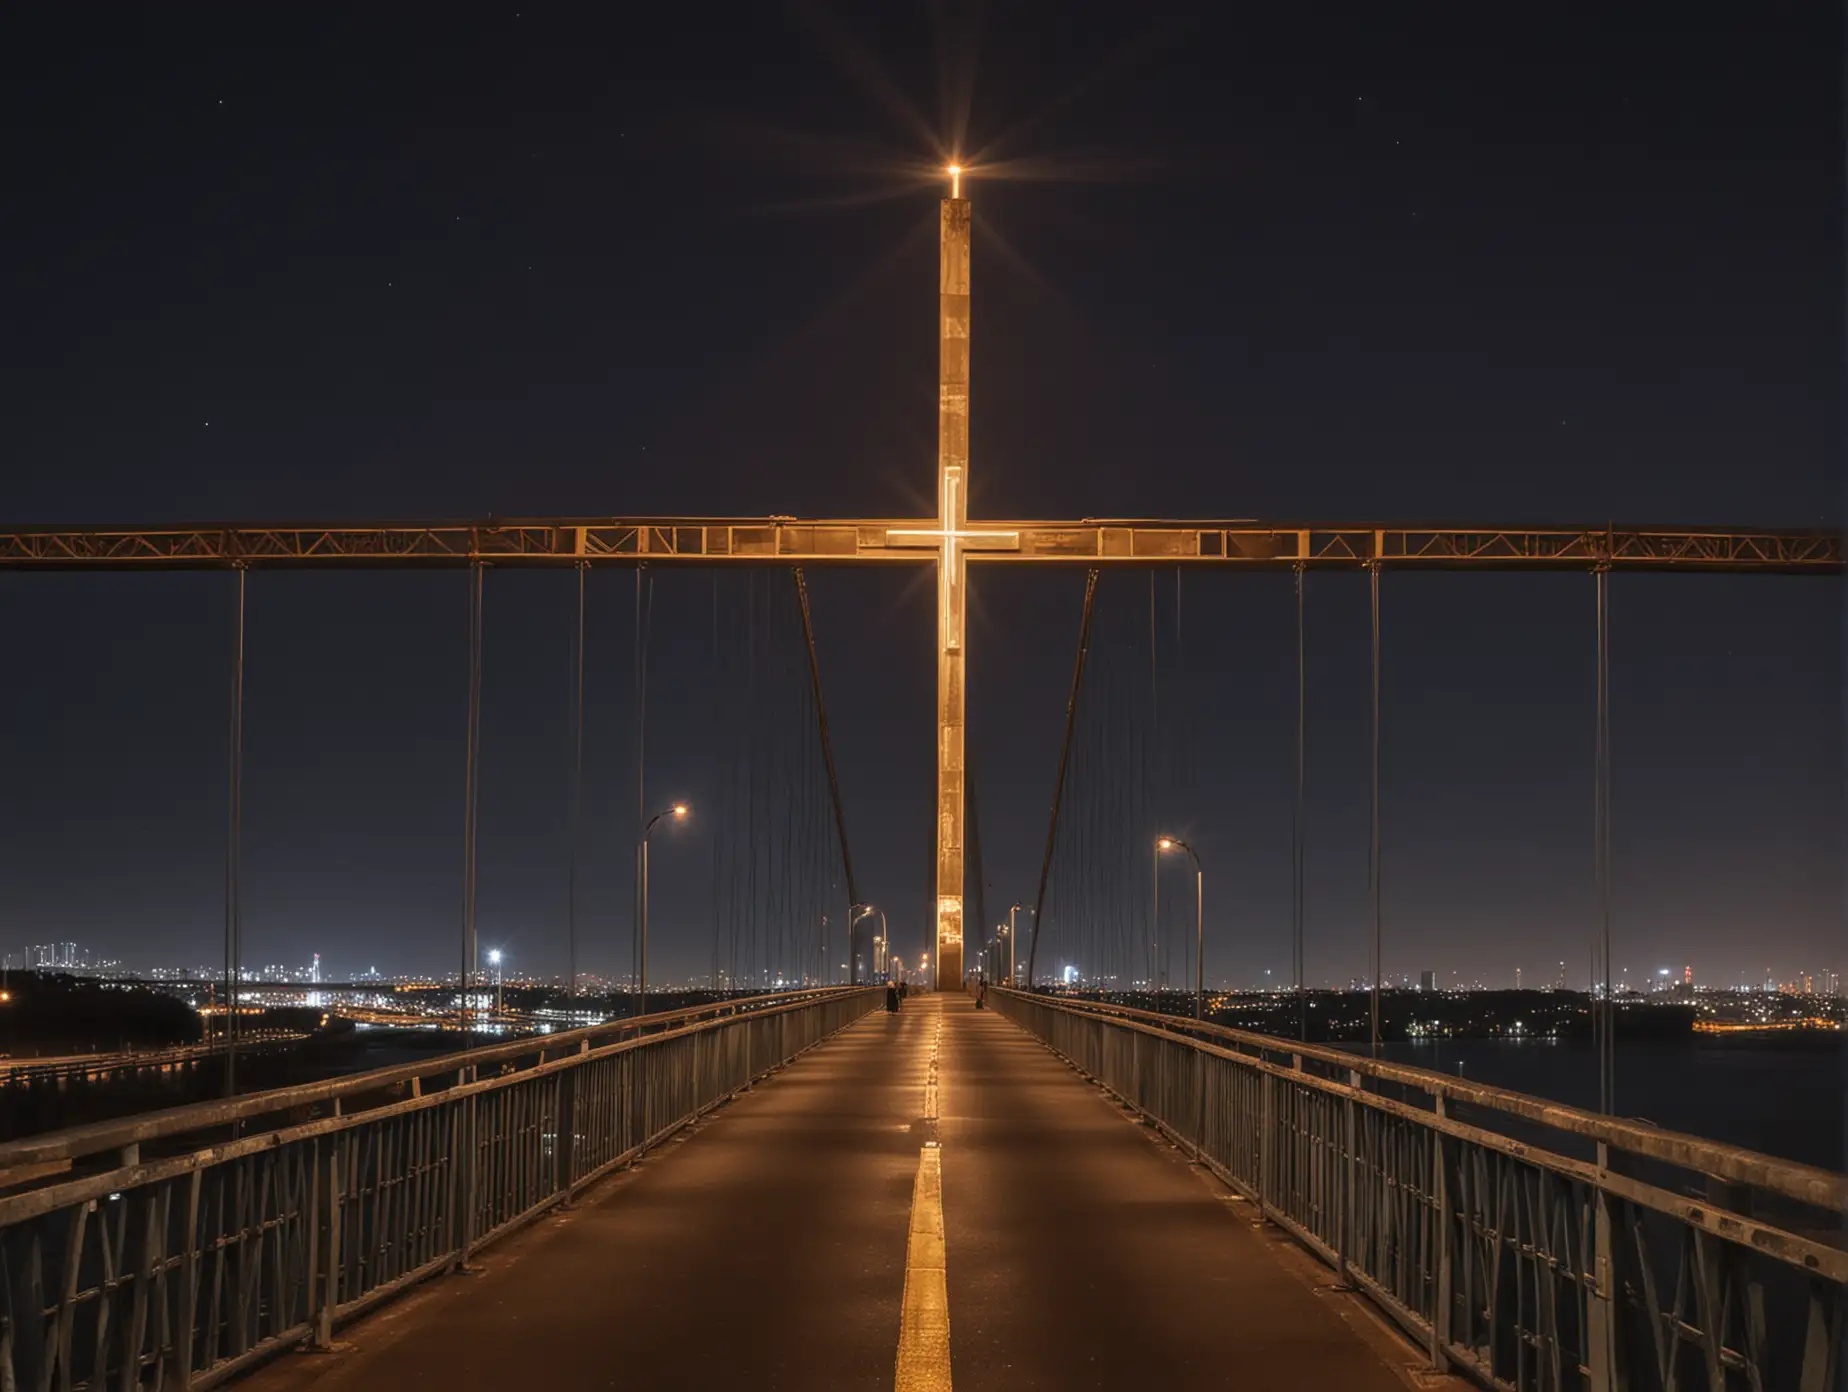 Nighttime-Bridge-with-Illuminated-Cross-in-the-Foreground